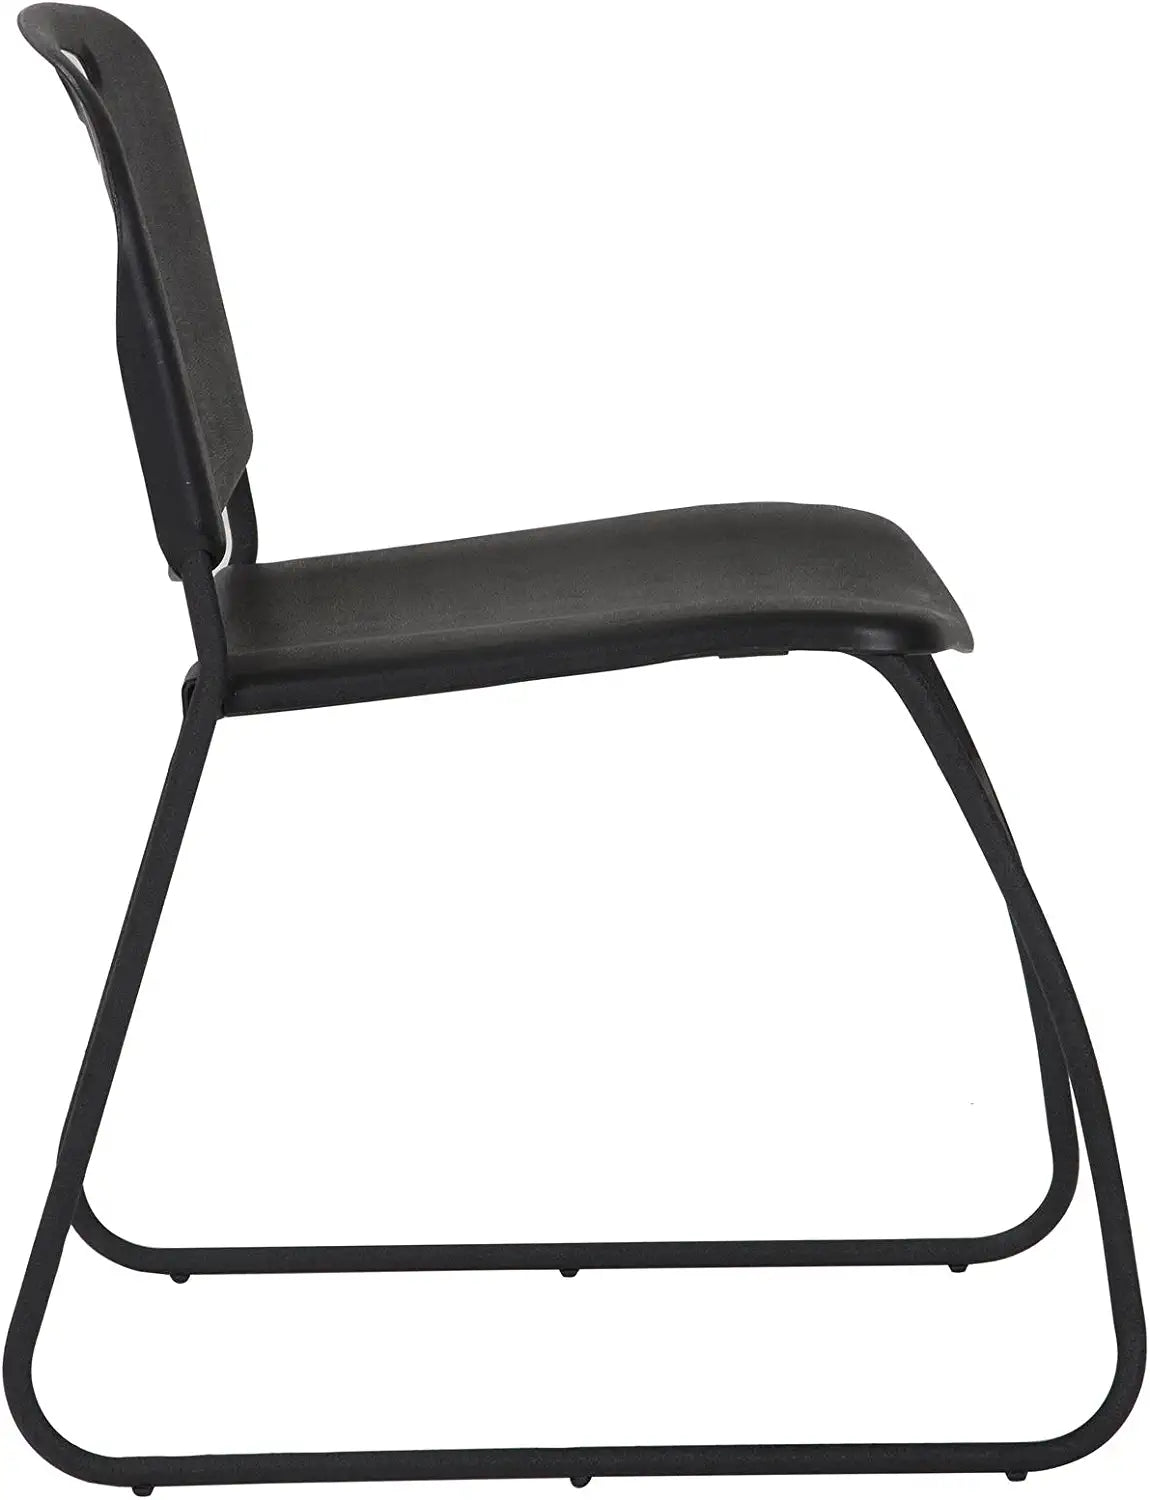 COSCO Commercial Contoured Back Resin Stacking Chair, Black, 4 Pack